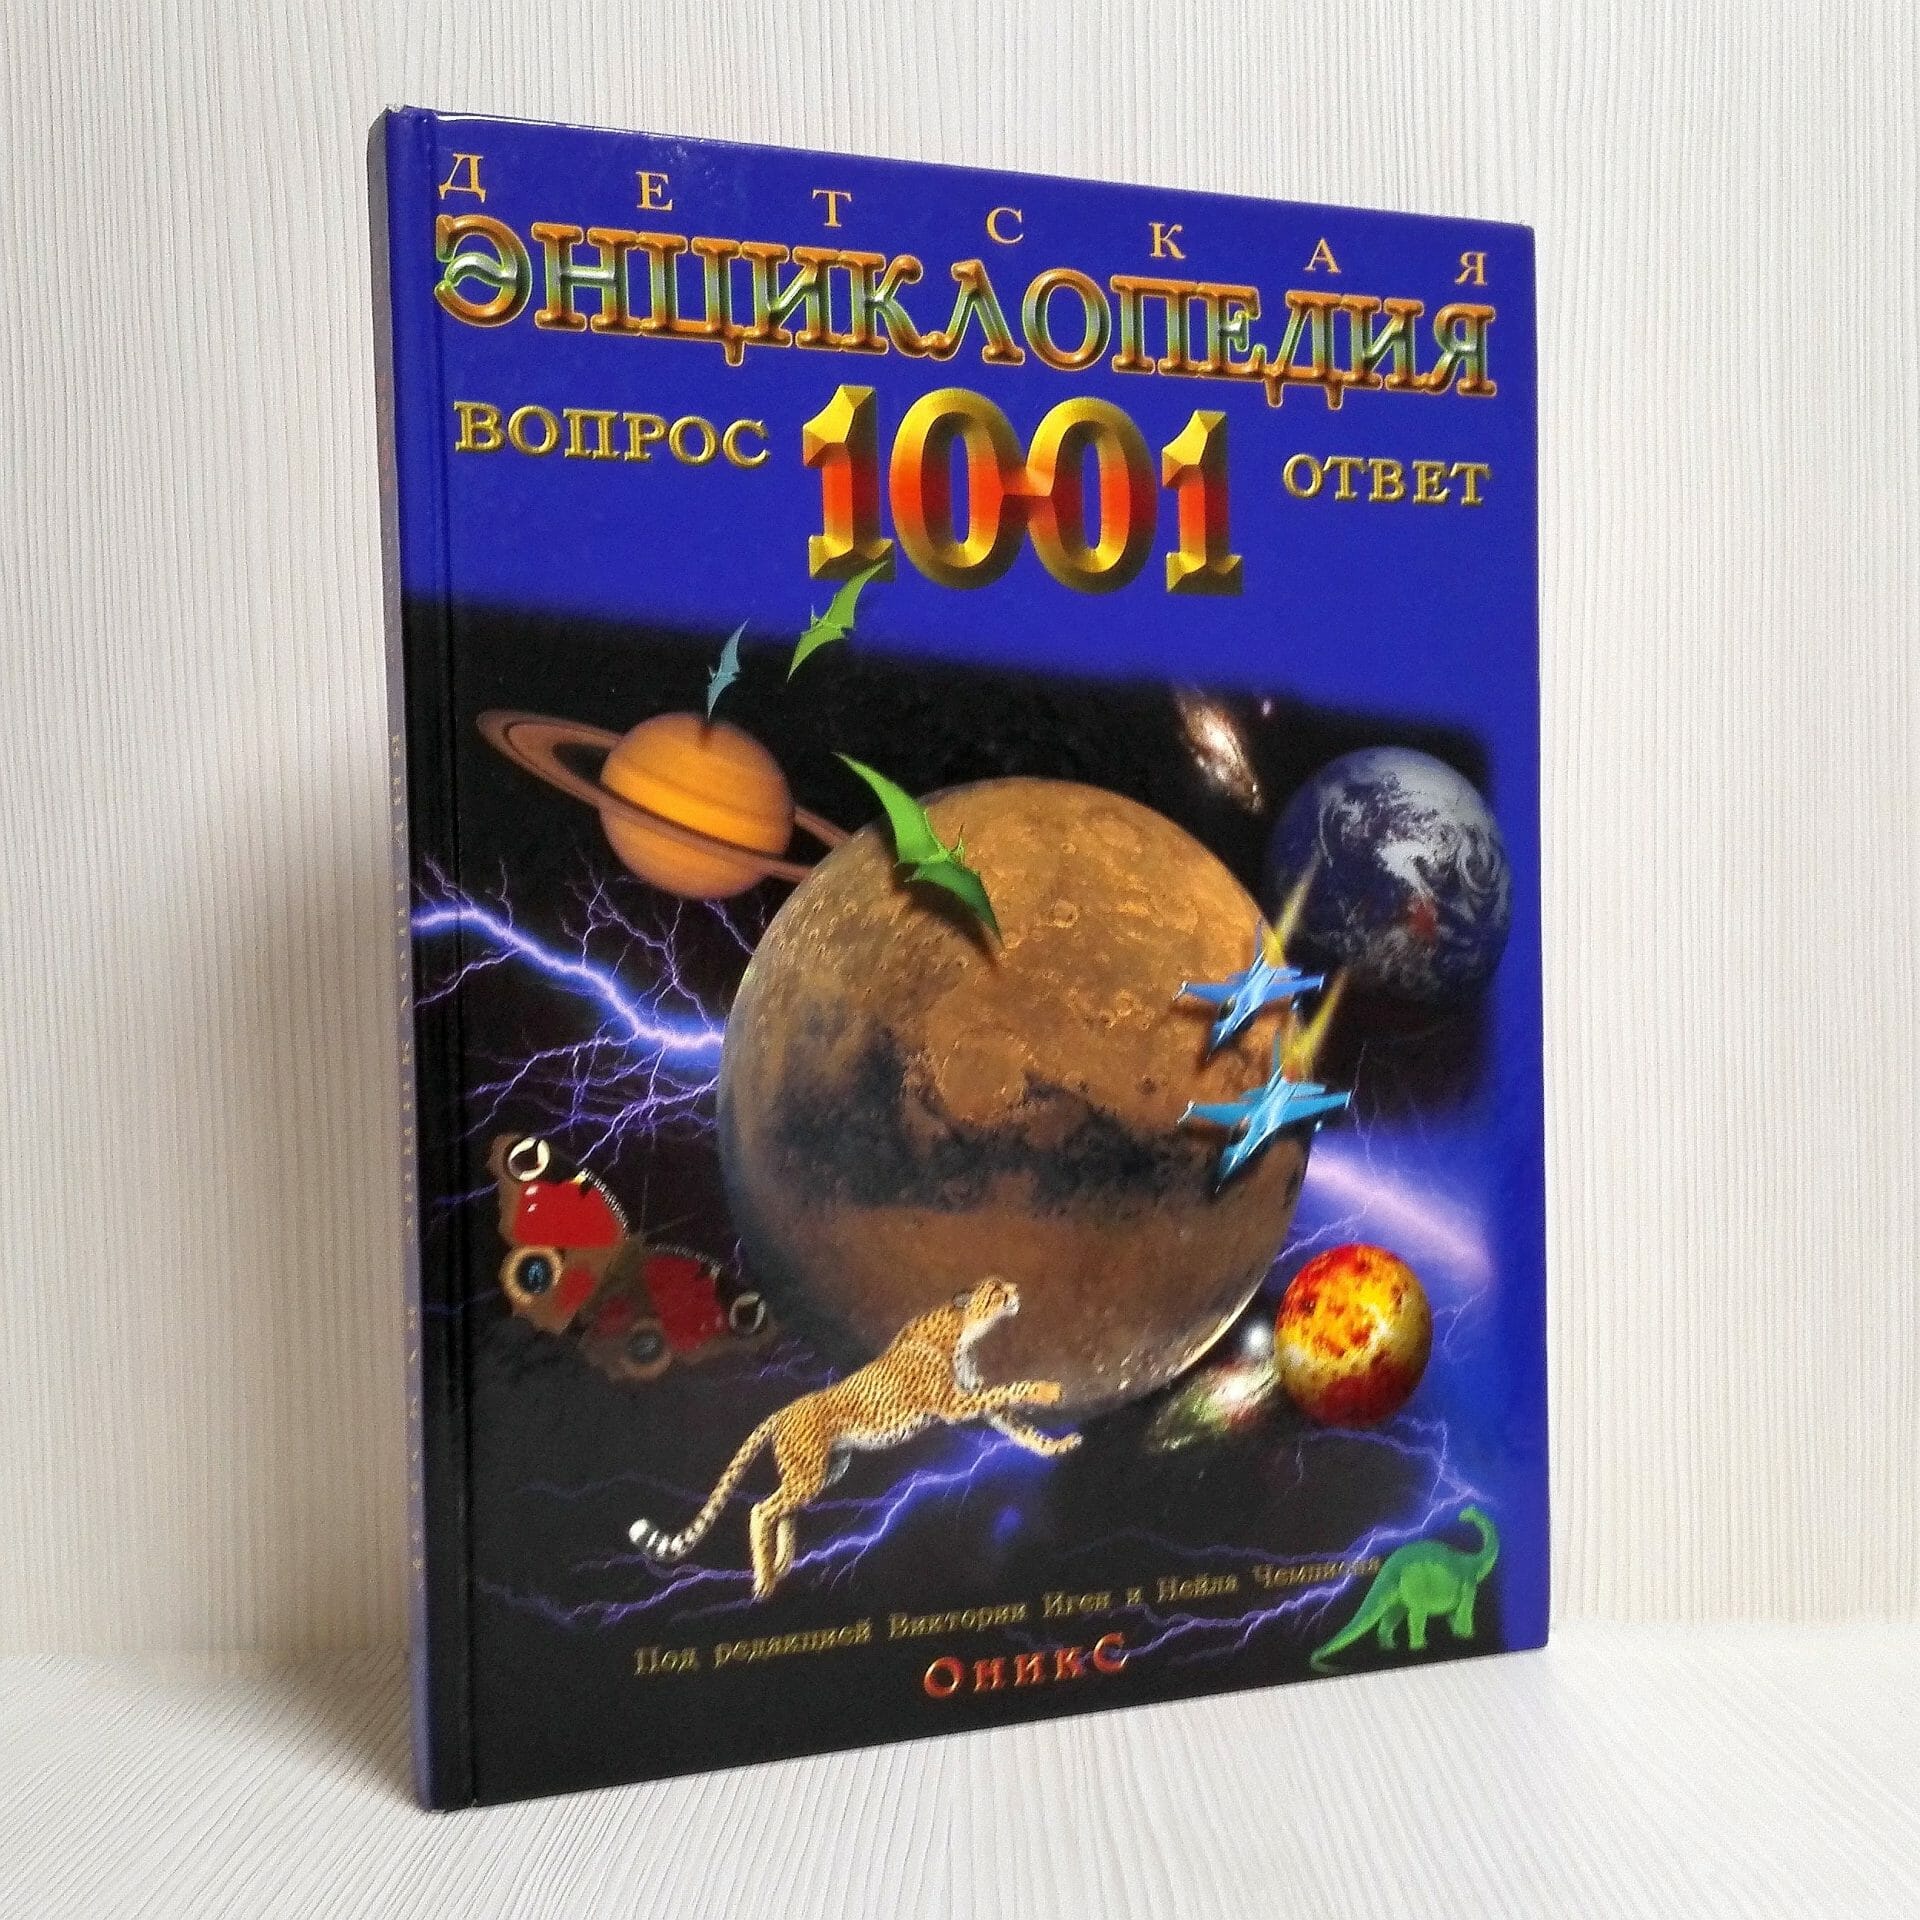 book 1001 questions and answers